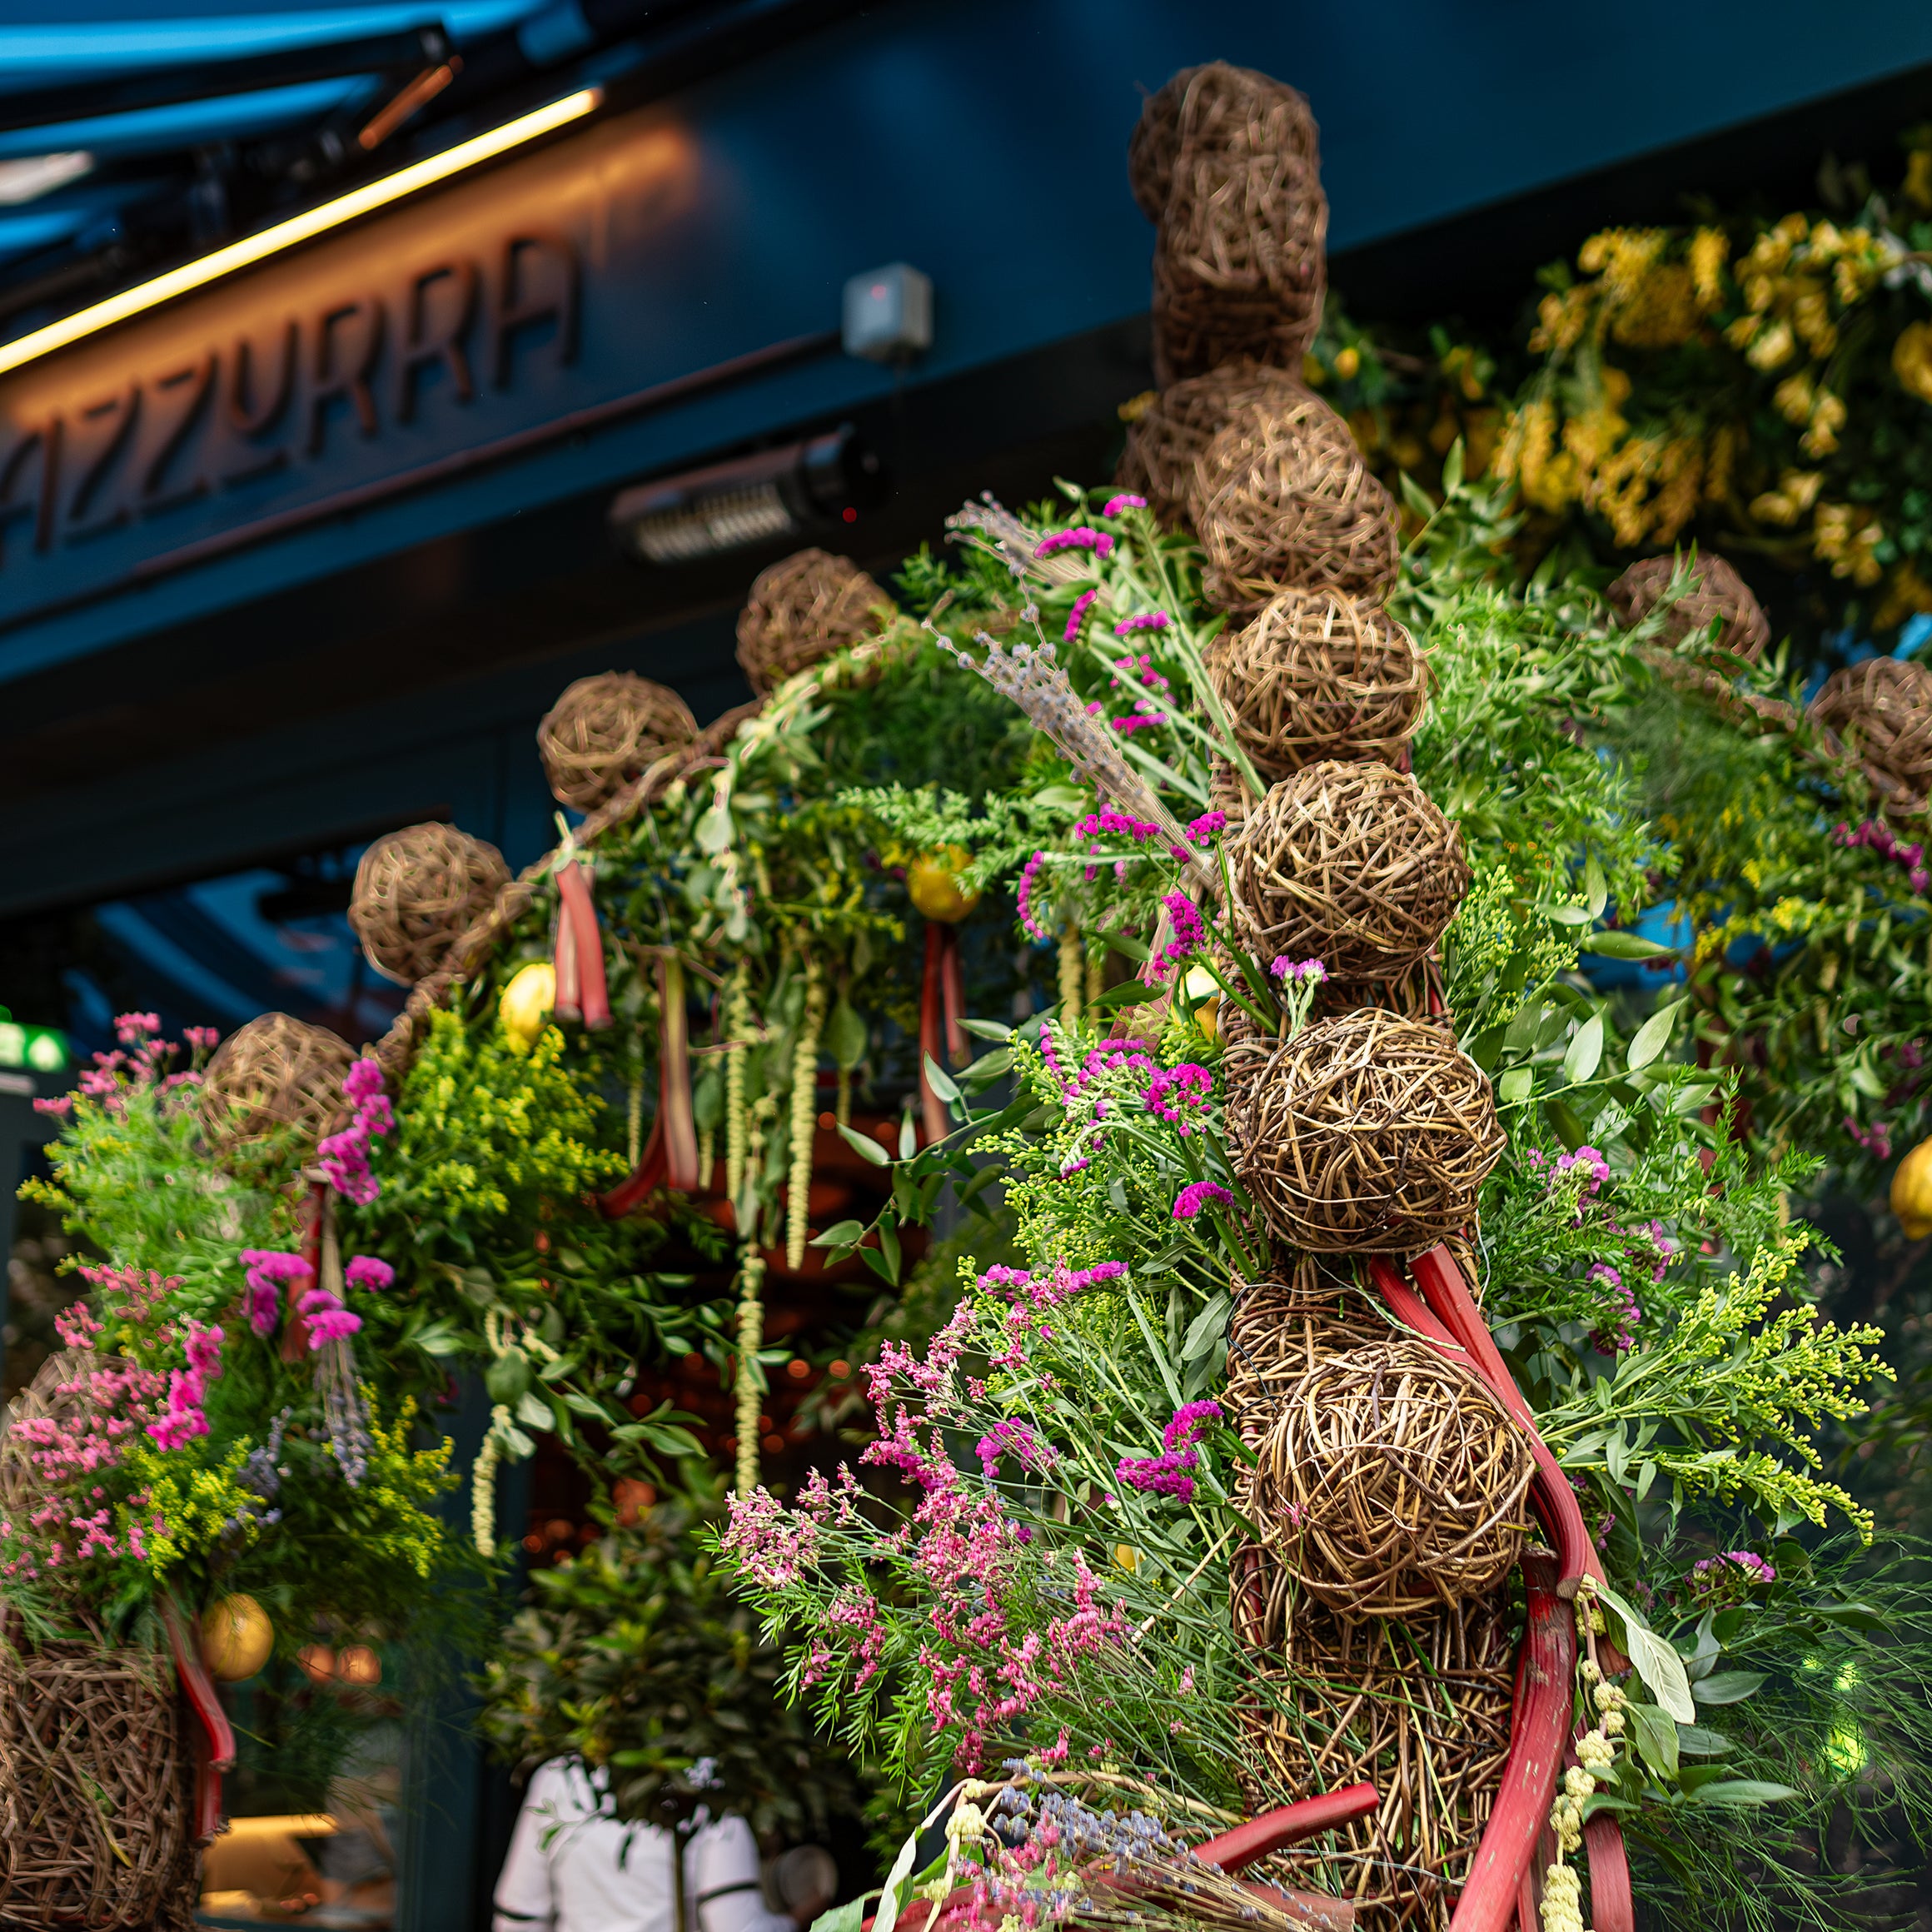 An impressive floral installation by Amaranté London at Chelsea in Bloom showcases a wicker arch adorned with lush greenery, pink and yellow flowers, and lemons in front of the Azzurra storefront.